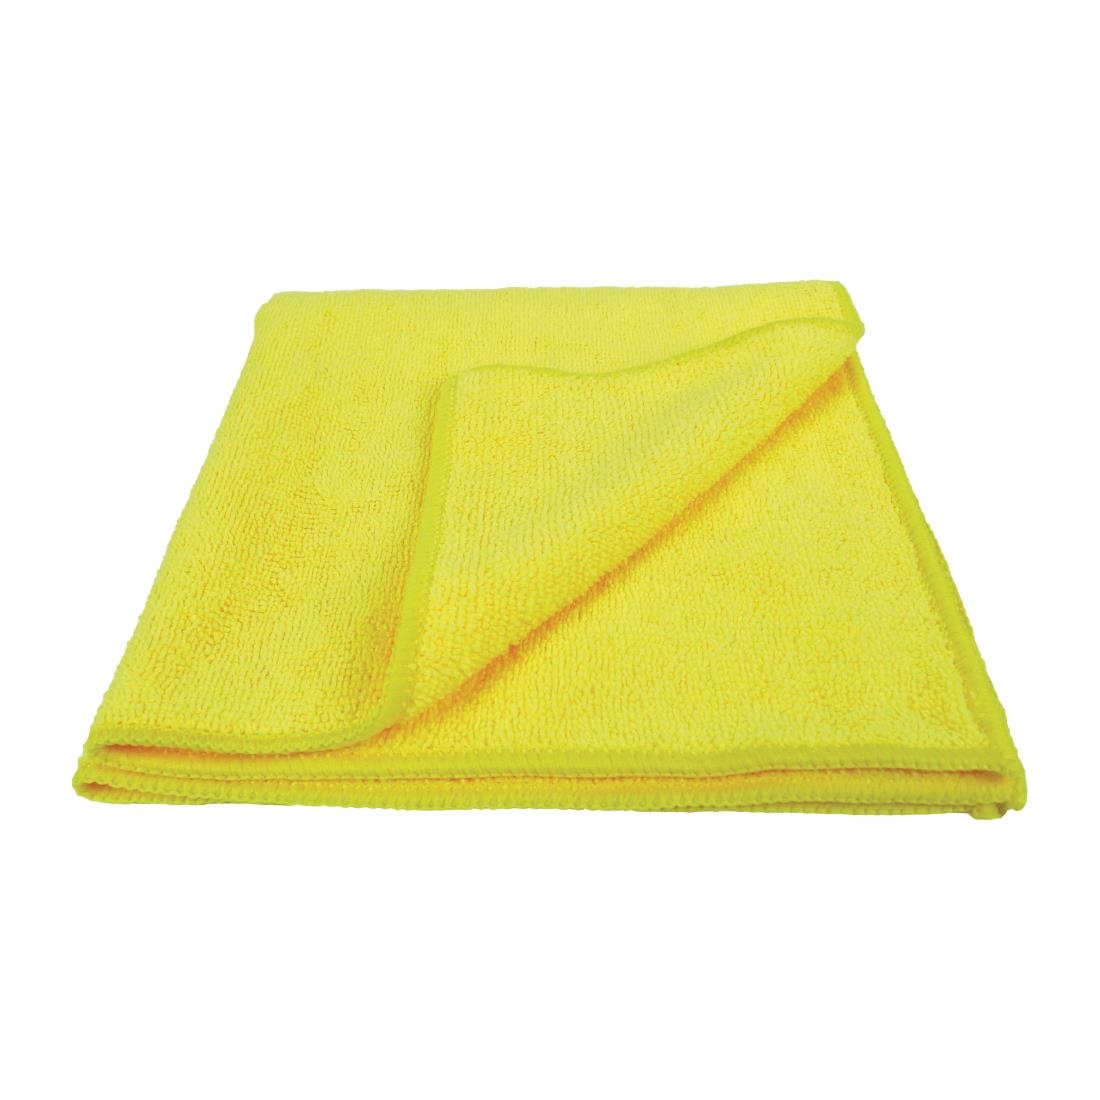 EcoTech Microfibre Cloths Yellow (Pack of 10)